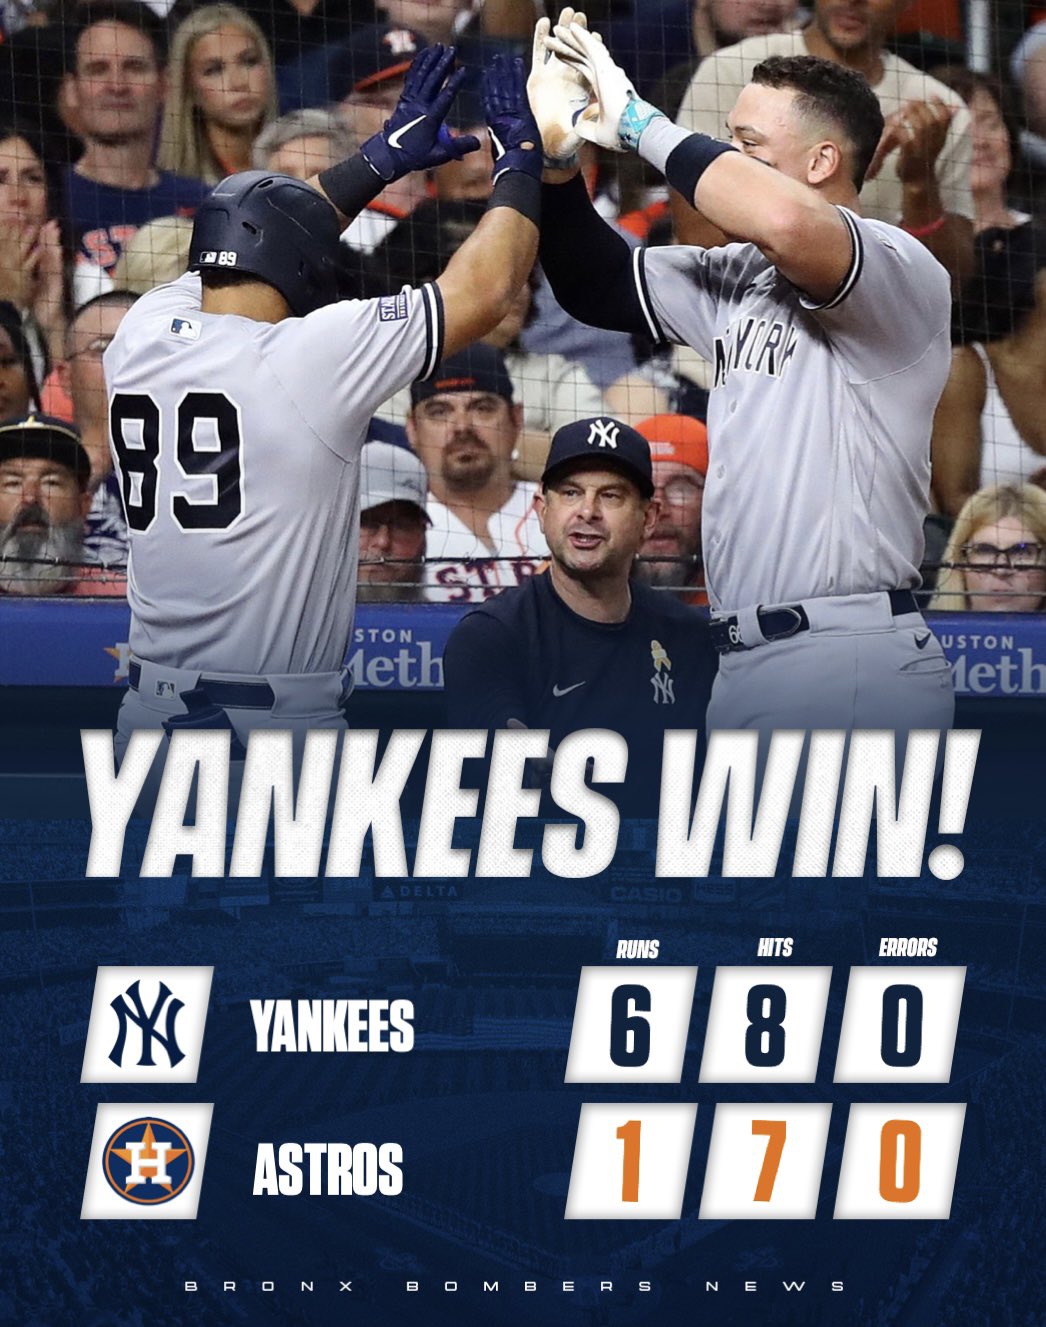 Bronx Bombers News on X: The #Yankees (68-69) complete the sweep of the # Astros for the first time since 2013 and have won eight of their last 12  games.  / X